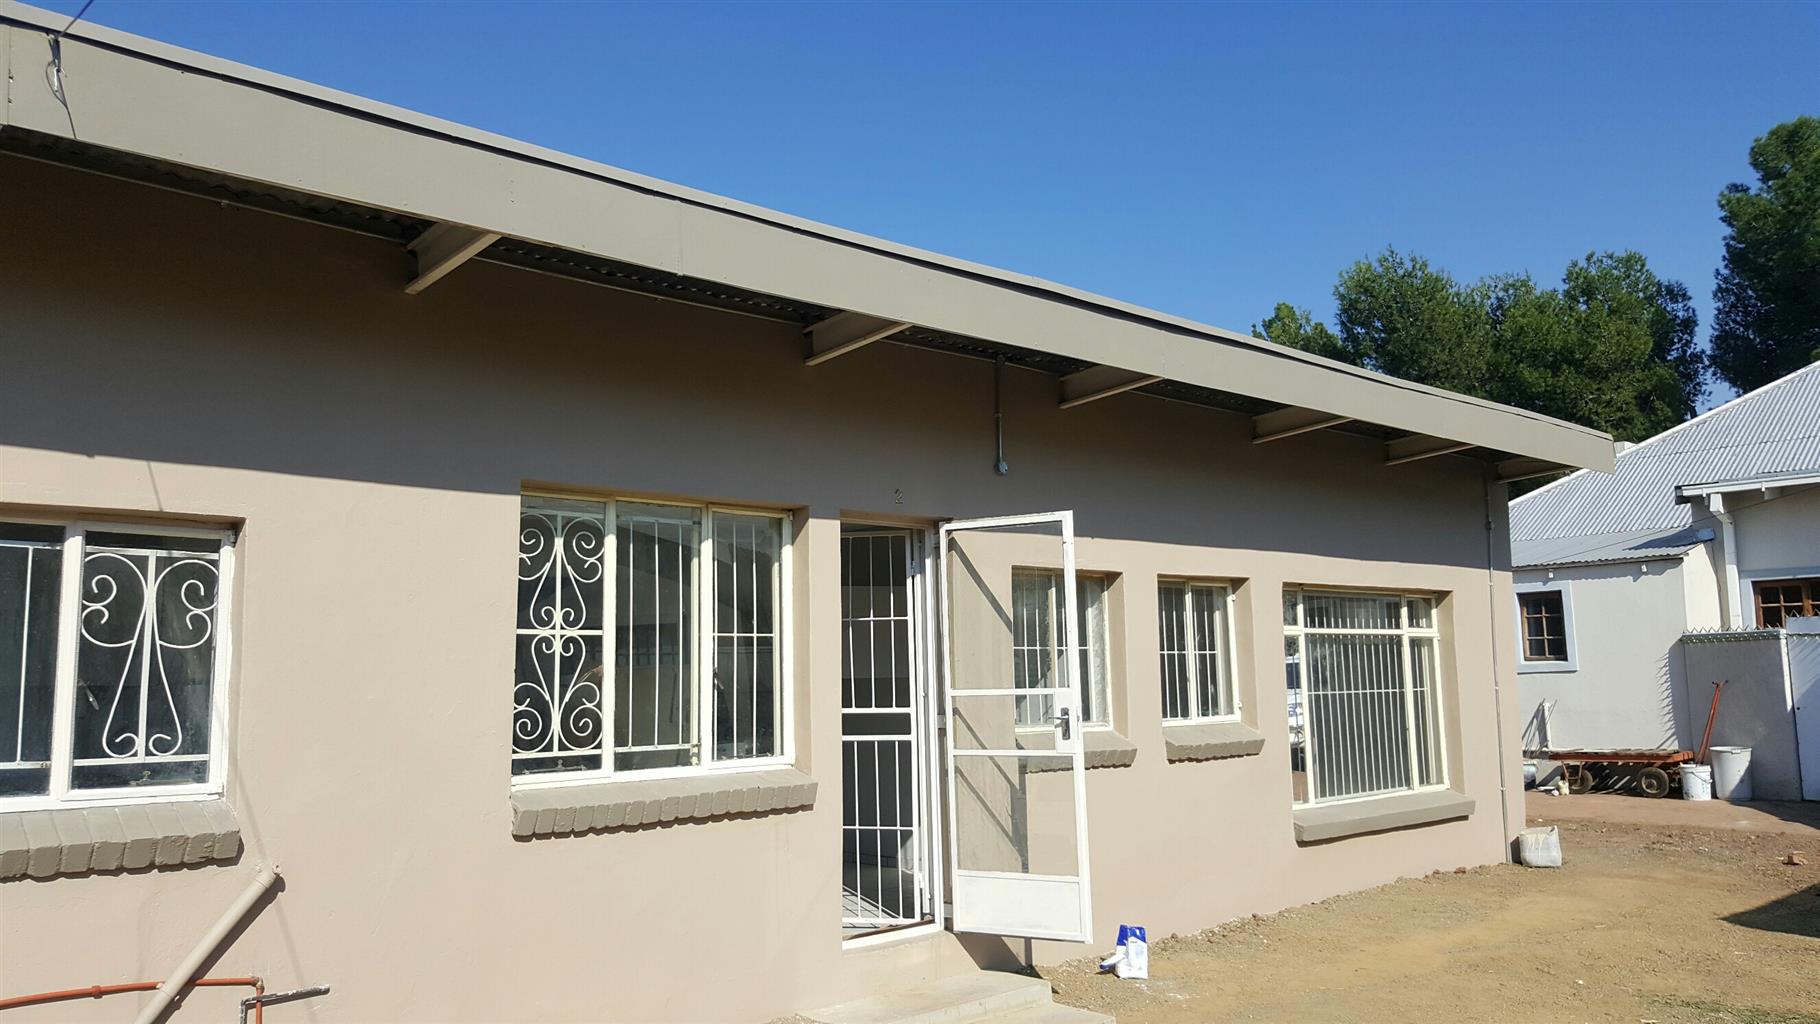 For Rent Affordable Apartments In Bloemfontein Listings And